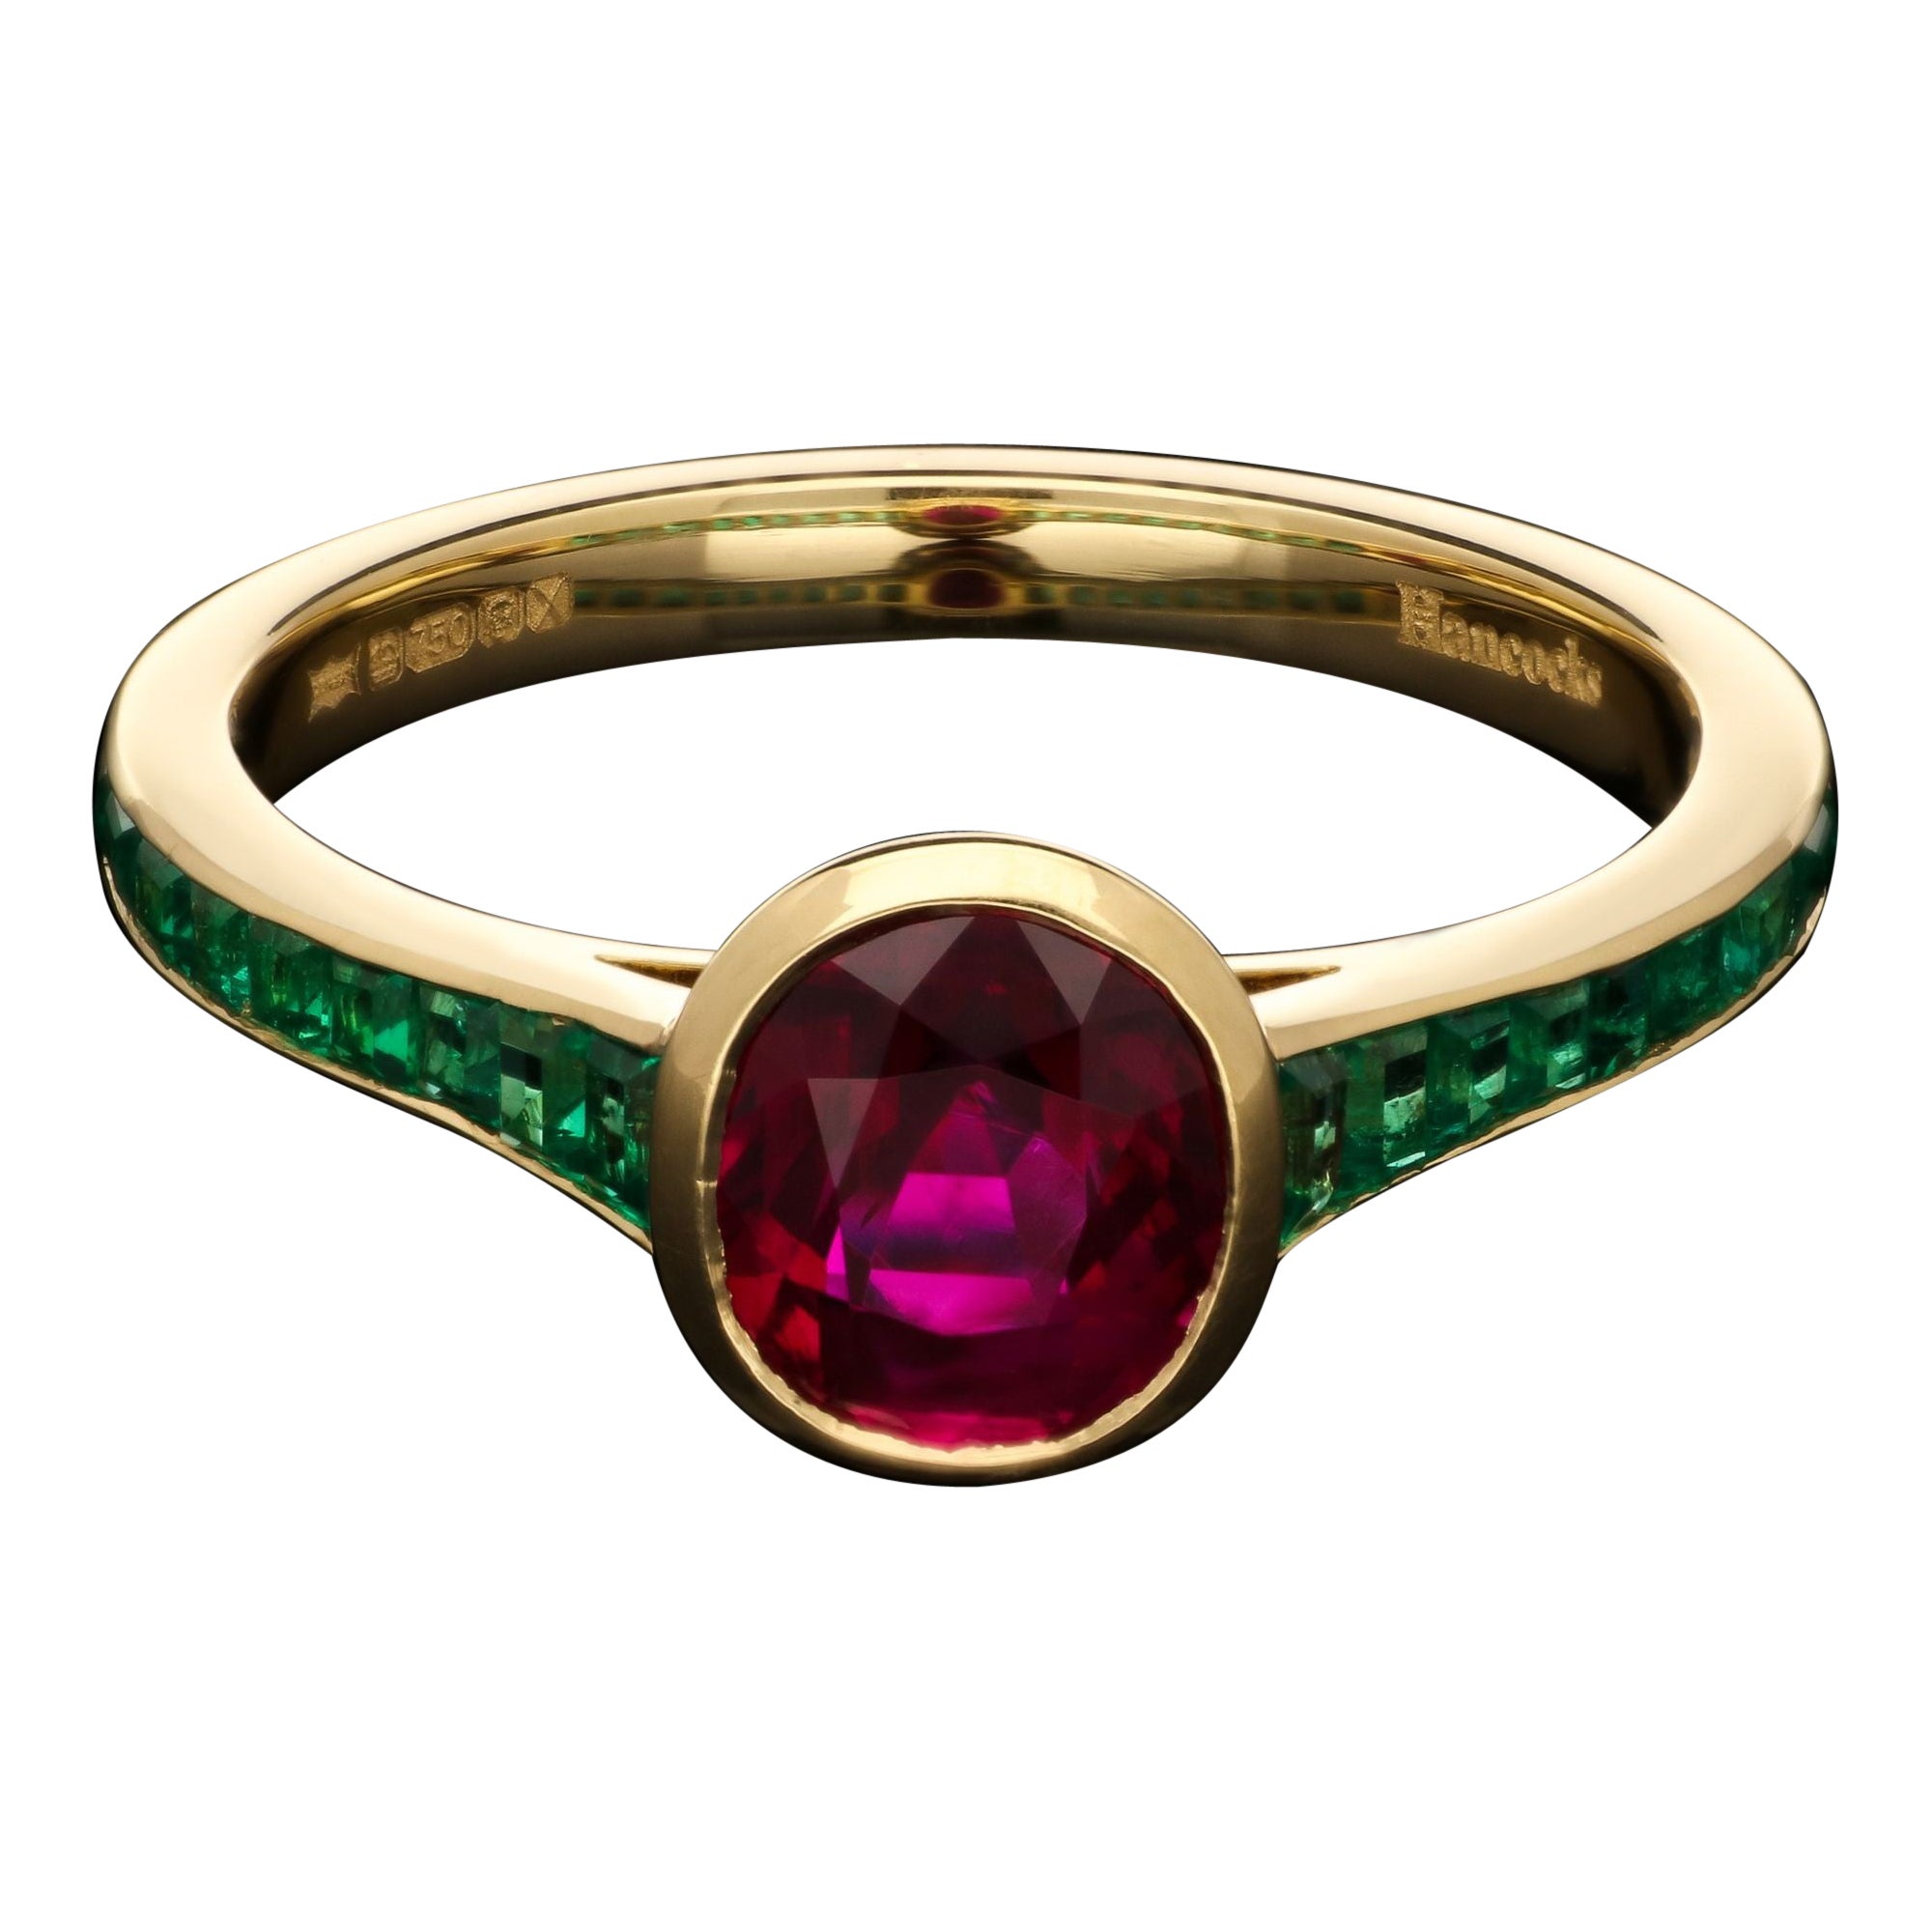 Hancocks 1.58ct Burmese Ruby And Emerald Ring In 18ct Yellow Gold Contemporary For Sale